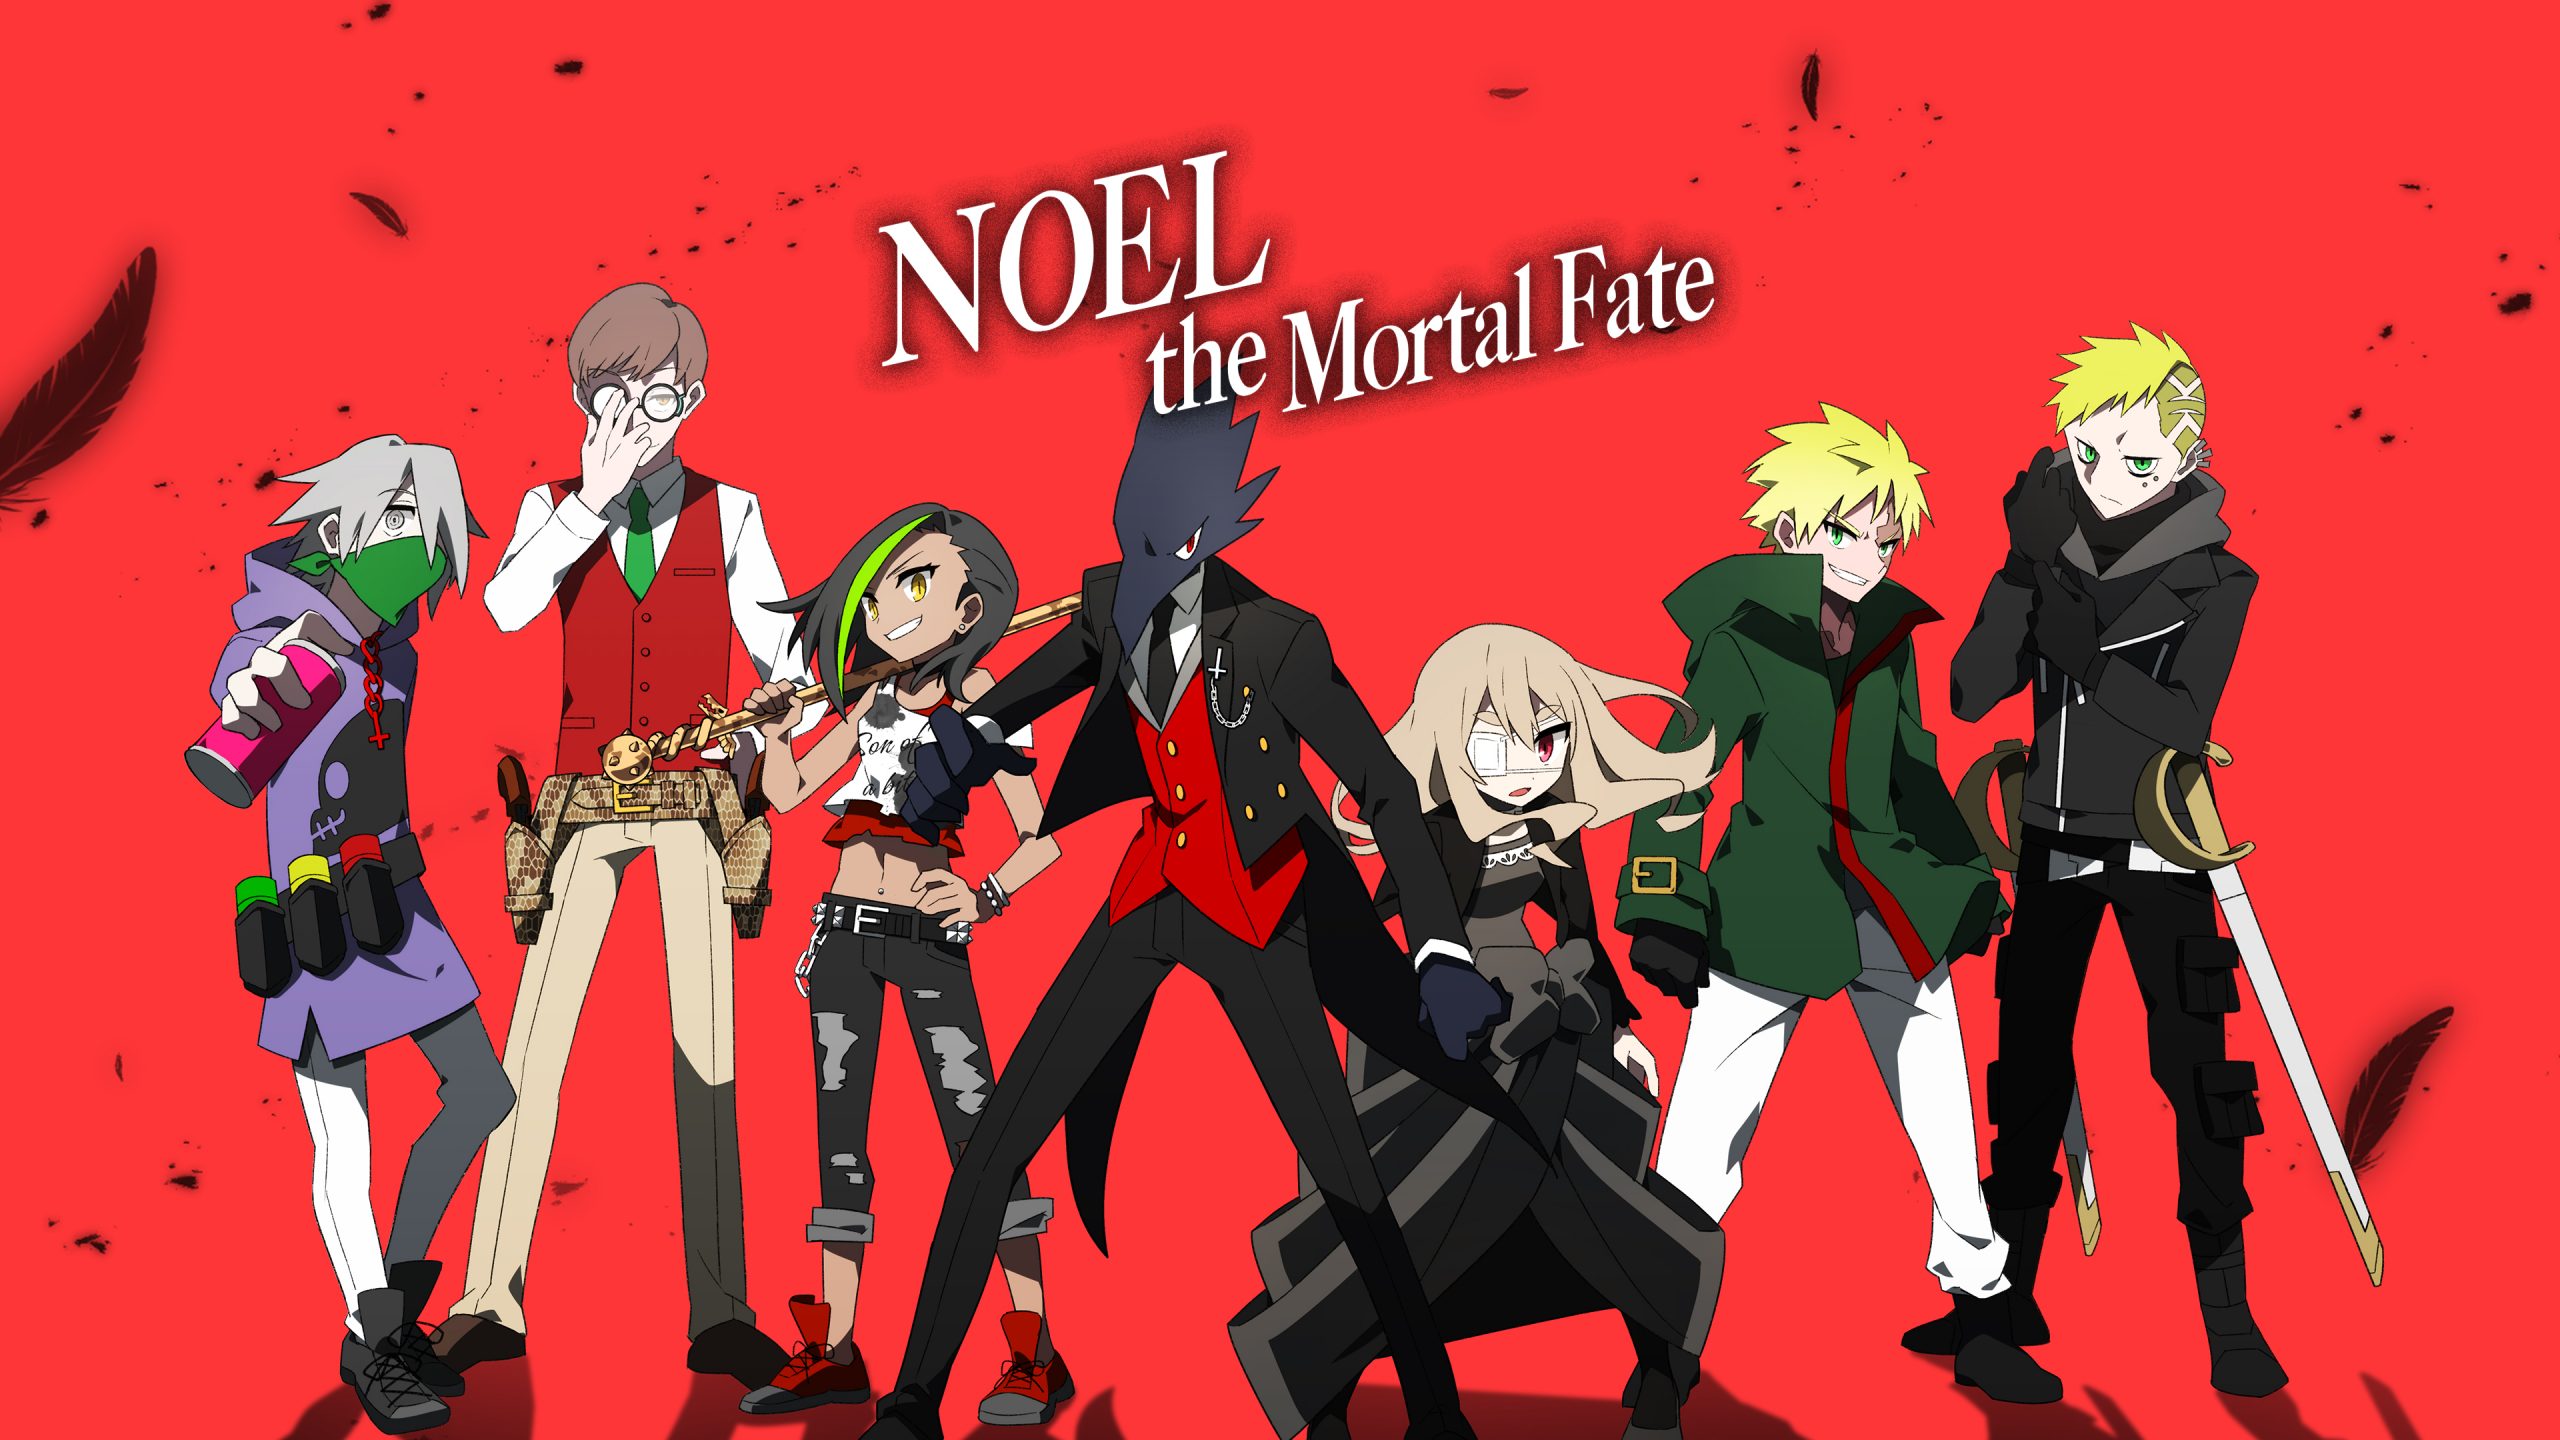 Noel the Mortal Fate available now on Xbox One, Xbox Series X|S, and Microsoft Store!